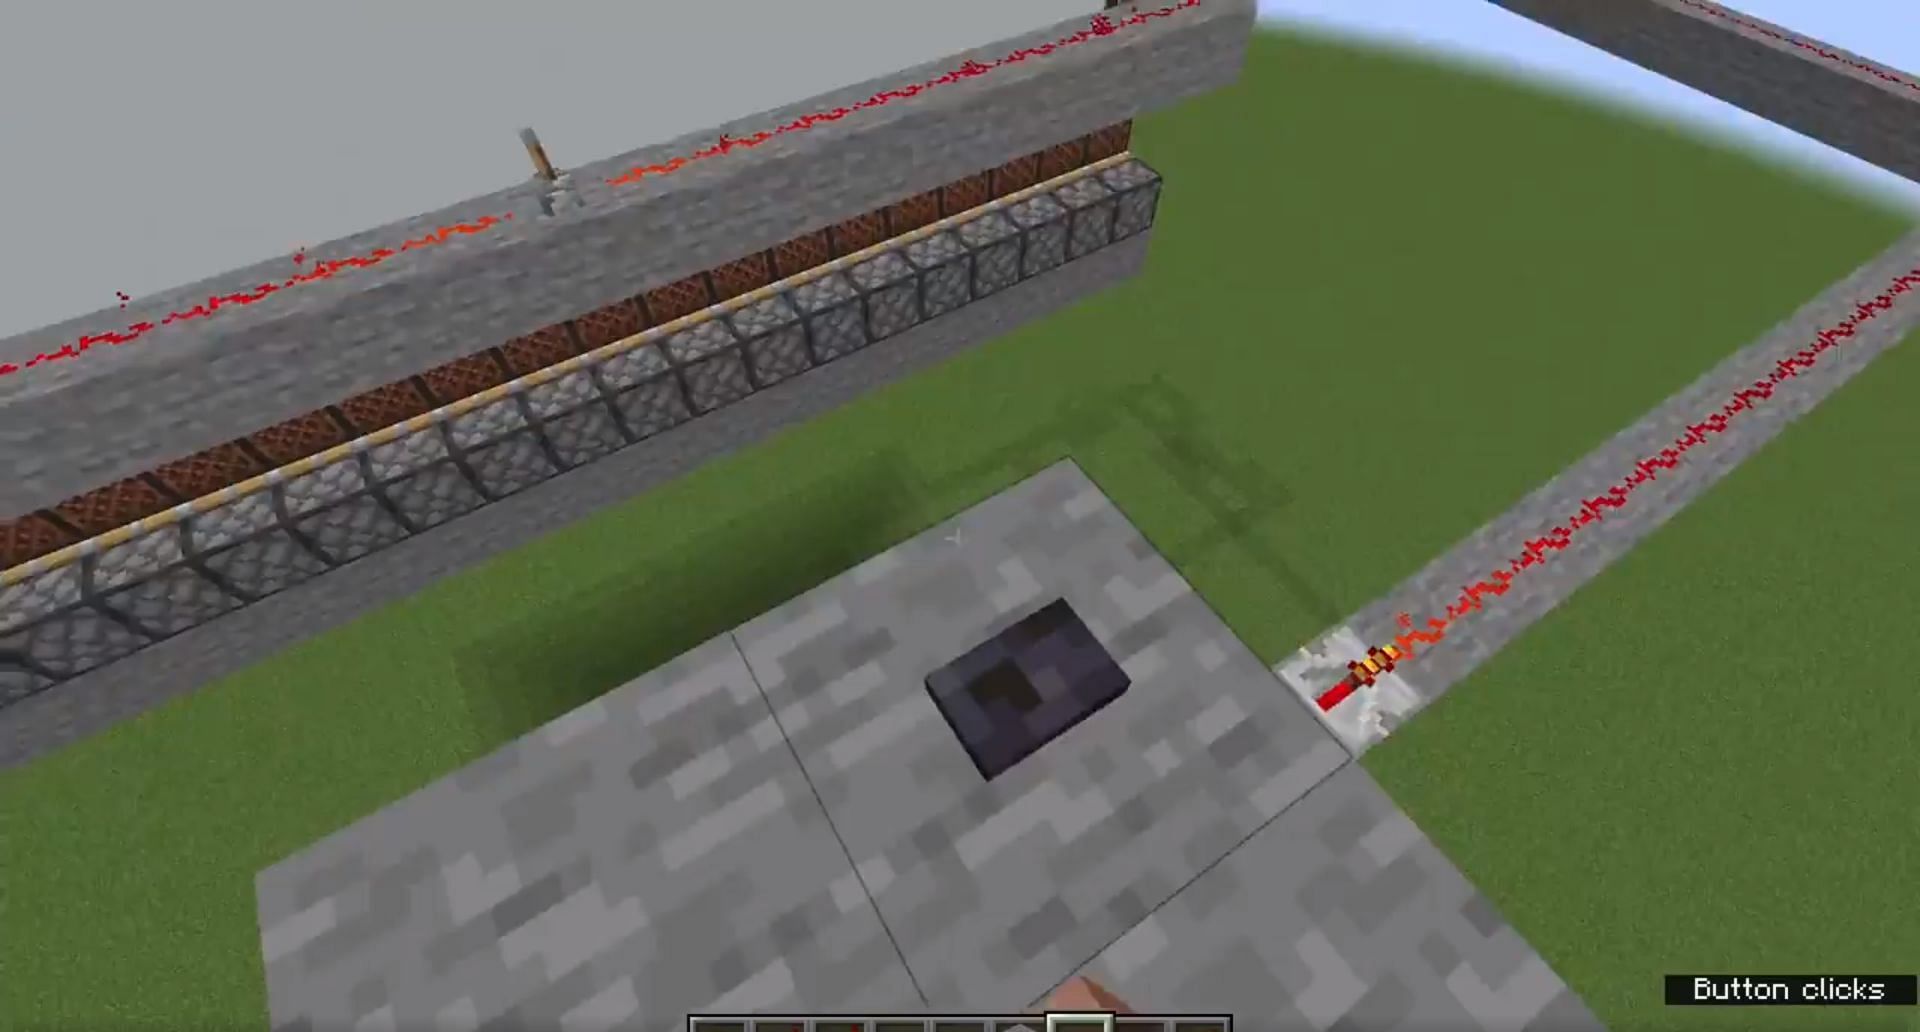 The start of the whole redstone contraption (Image via u/RUOK0214 Reddit)